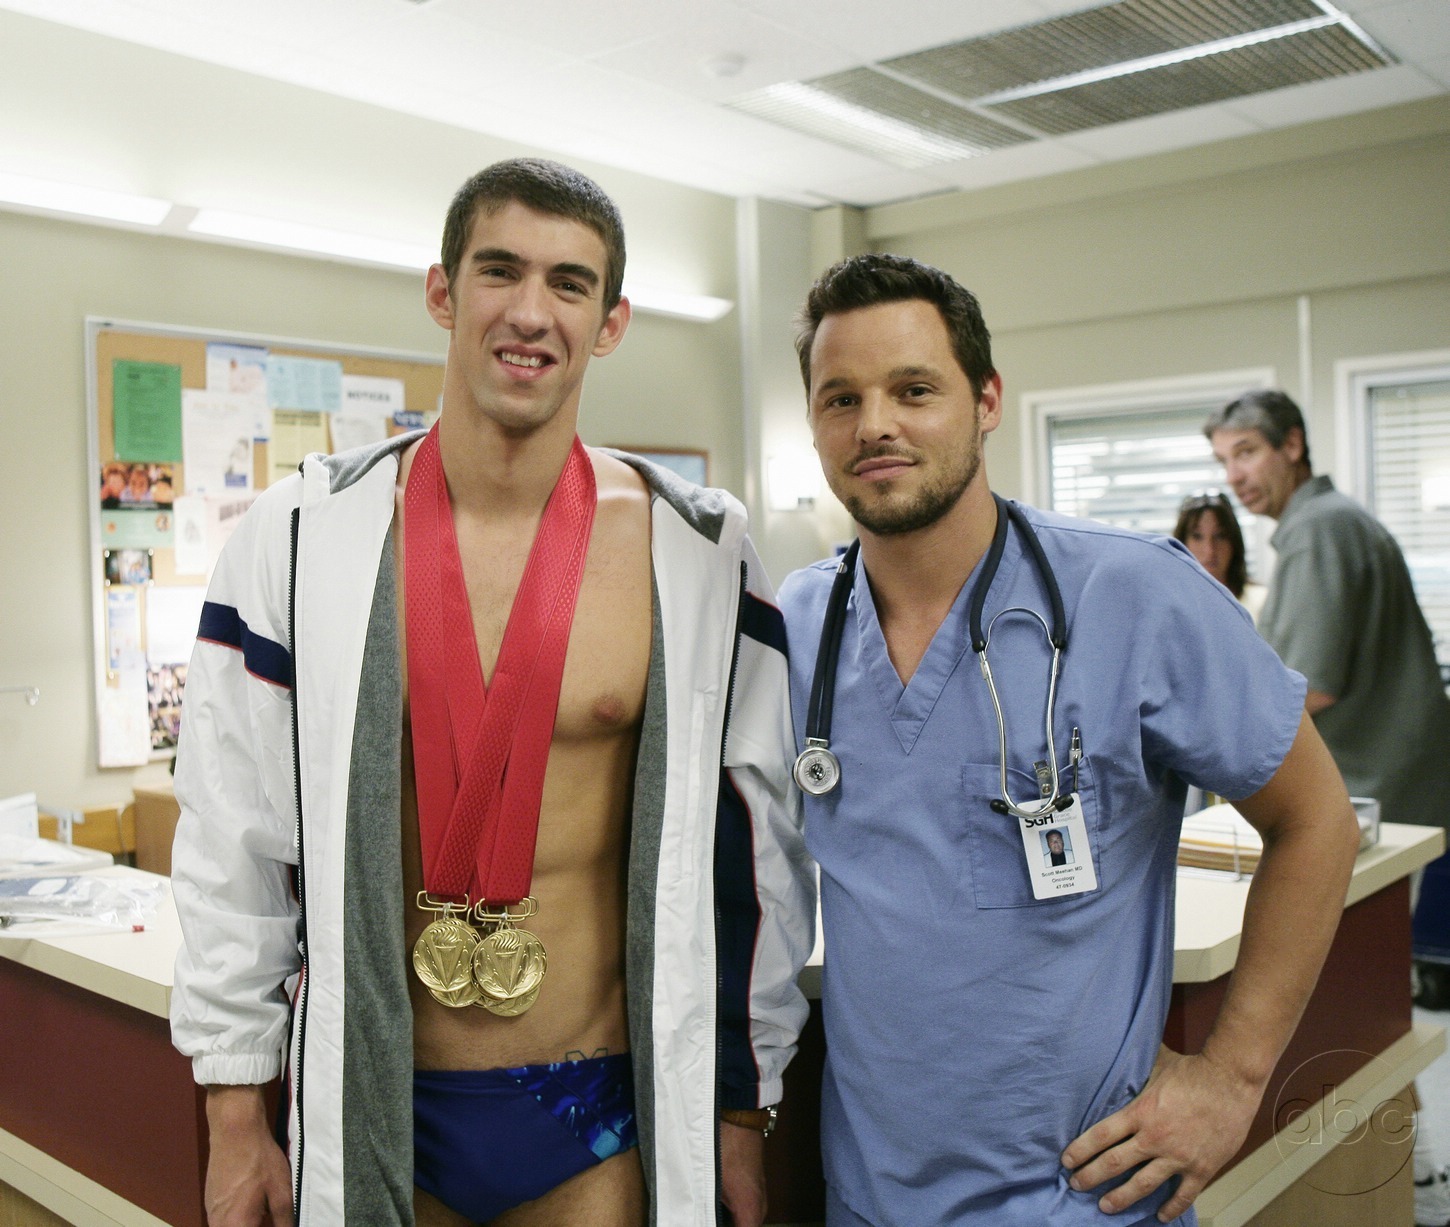 http://images1.fanpop.com/images/photos/2300000/Michael-Phelps-and-Justin-Chambers-greys-anatomy-2386918-1450-1227.jpg